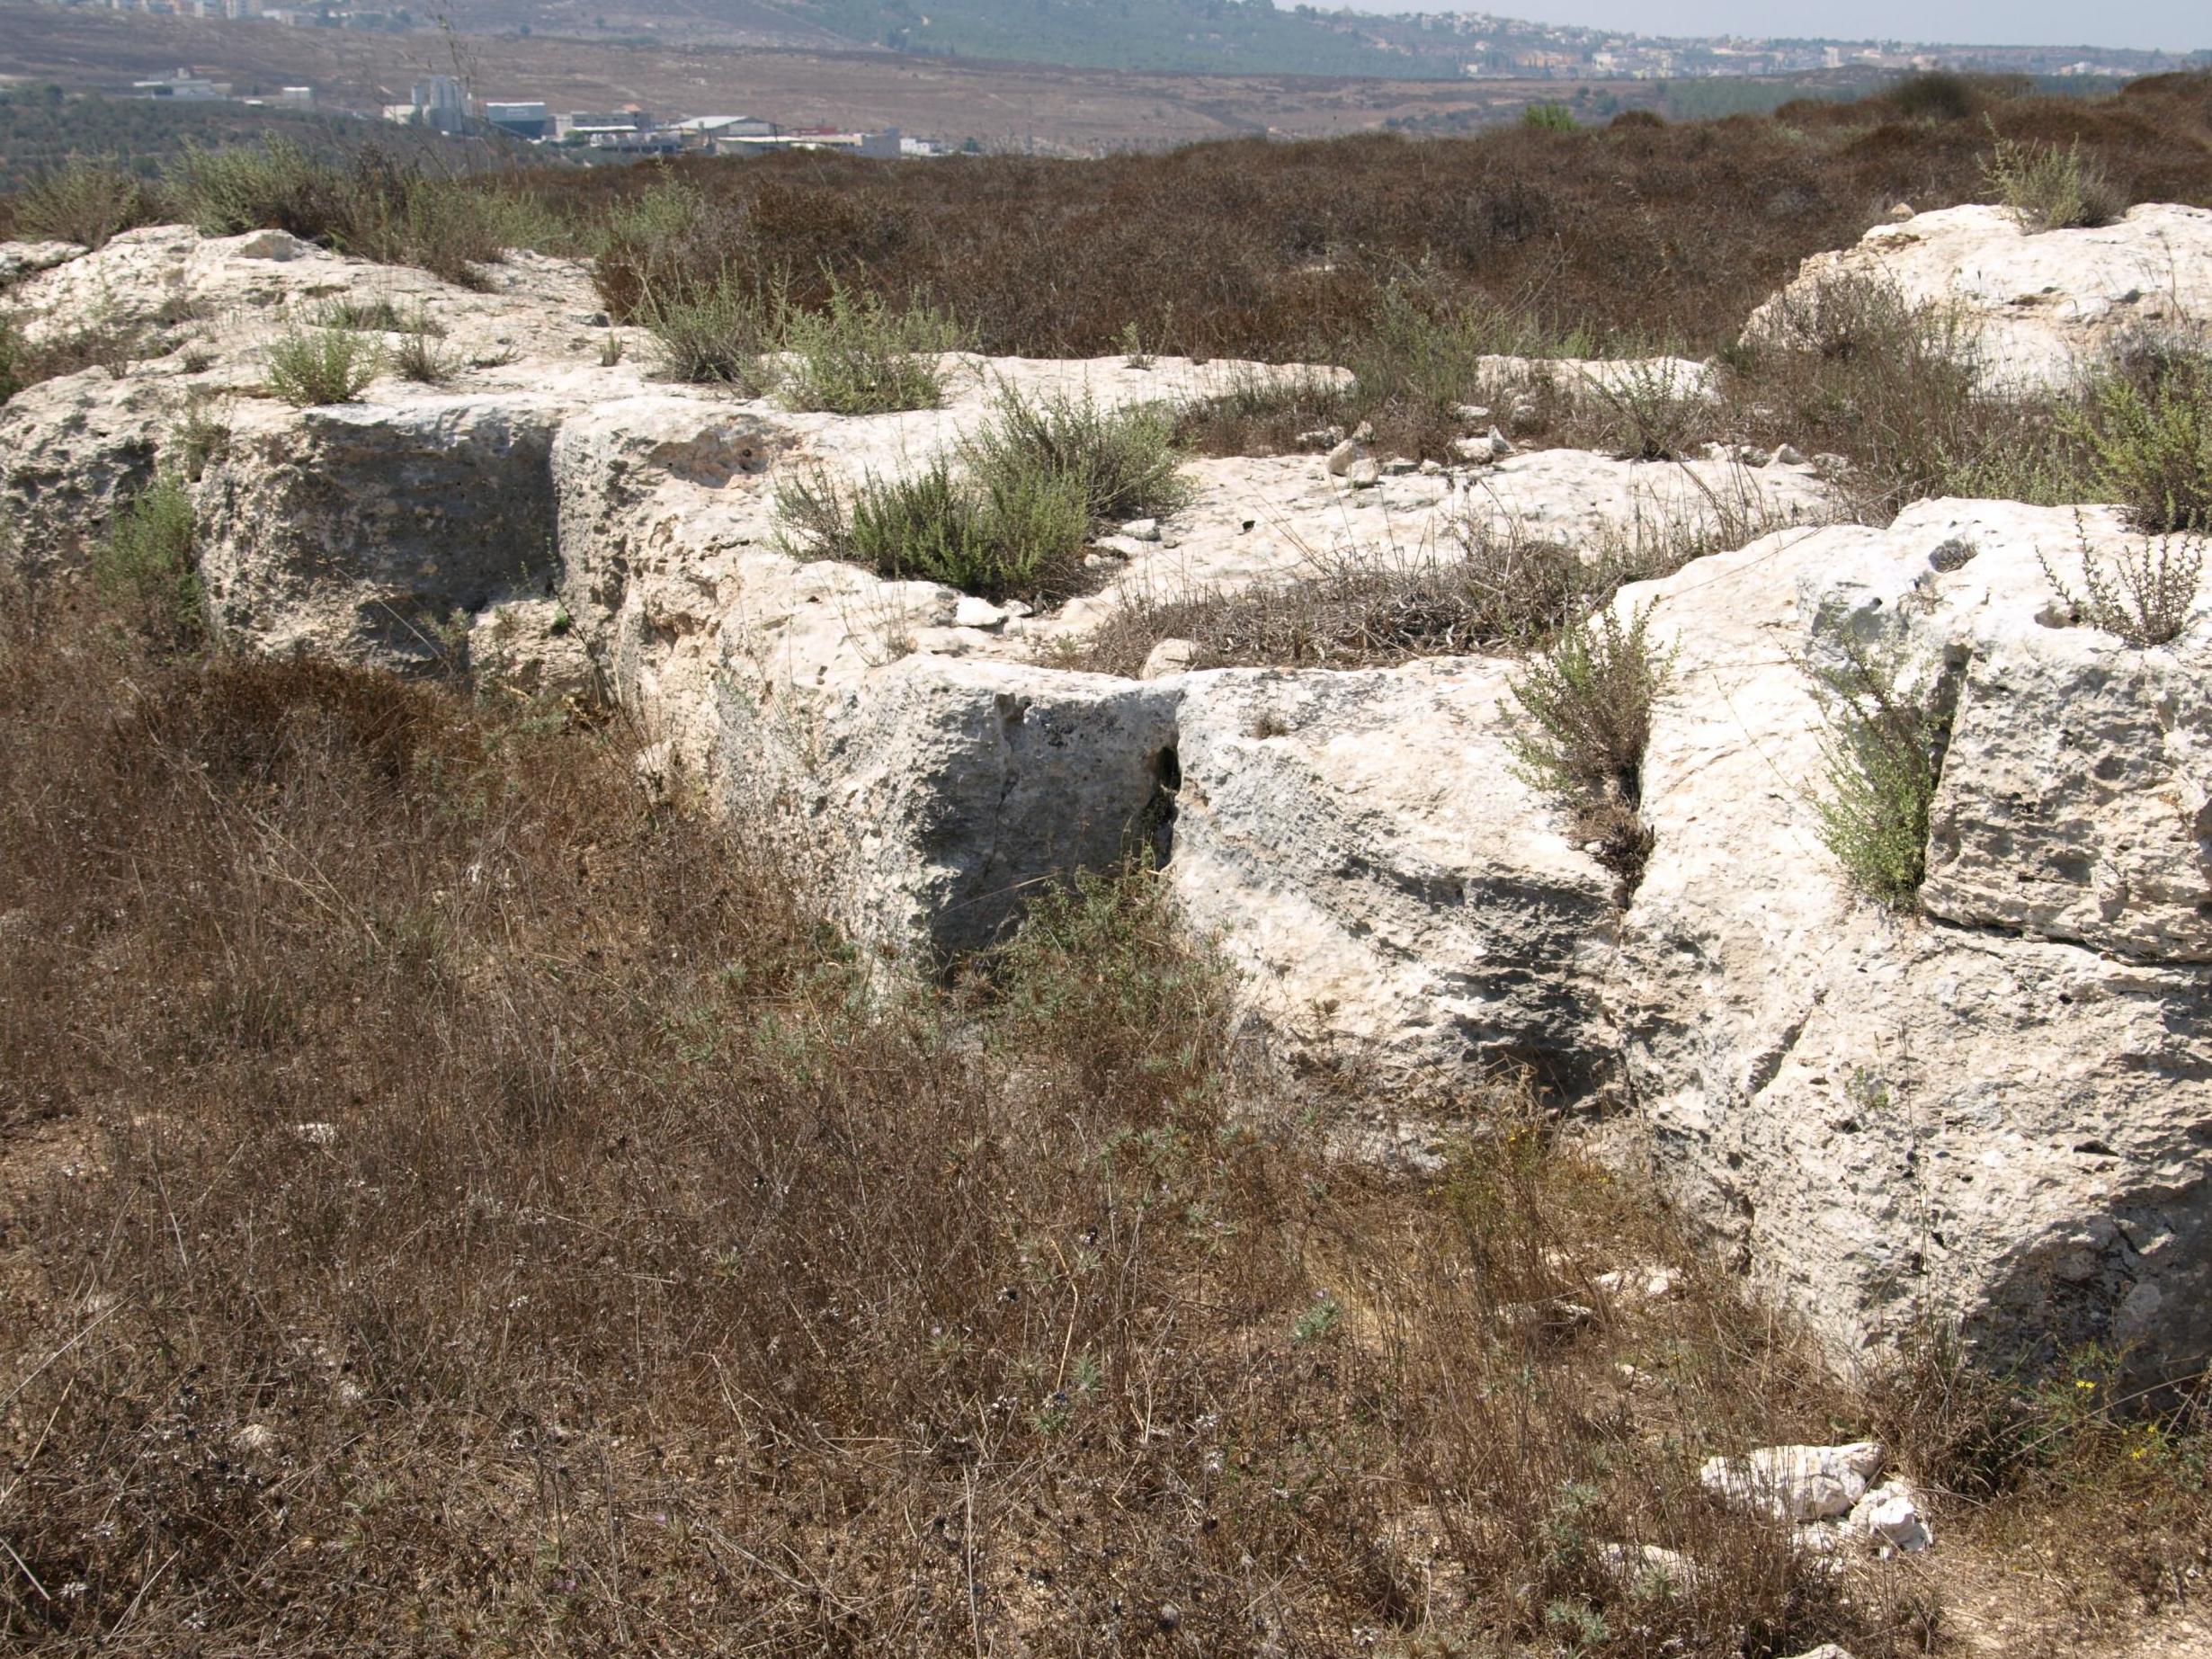 Limestone quarrying was an important industry in the Nazareth area. The main quarries were used to produce stone for the region's construction industry. Smaller quarries were used to produce ritually important stone bowls and cups